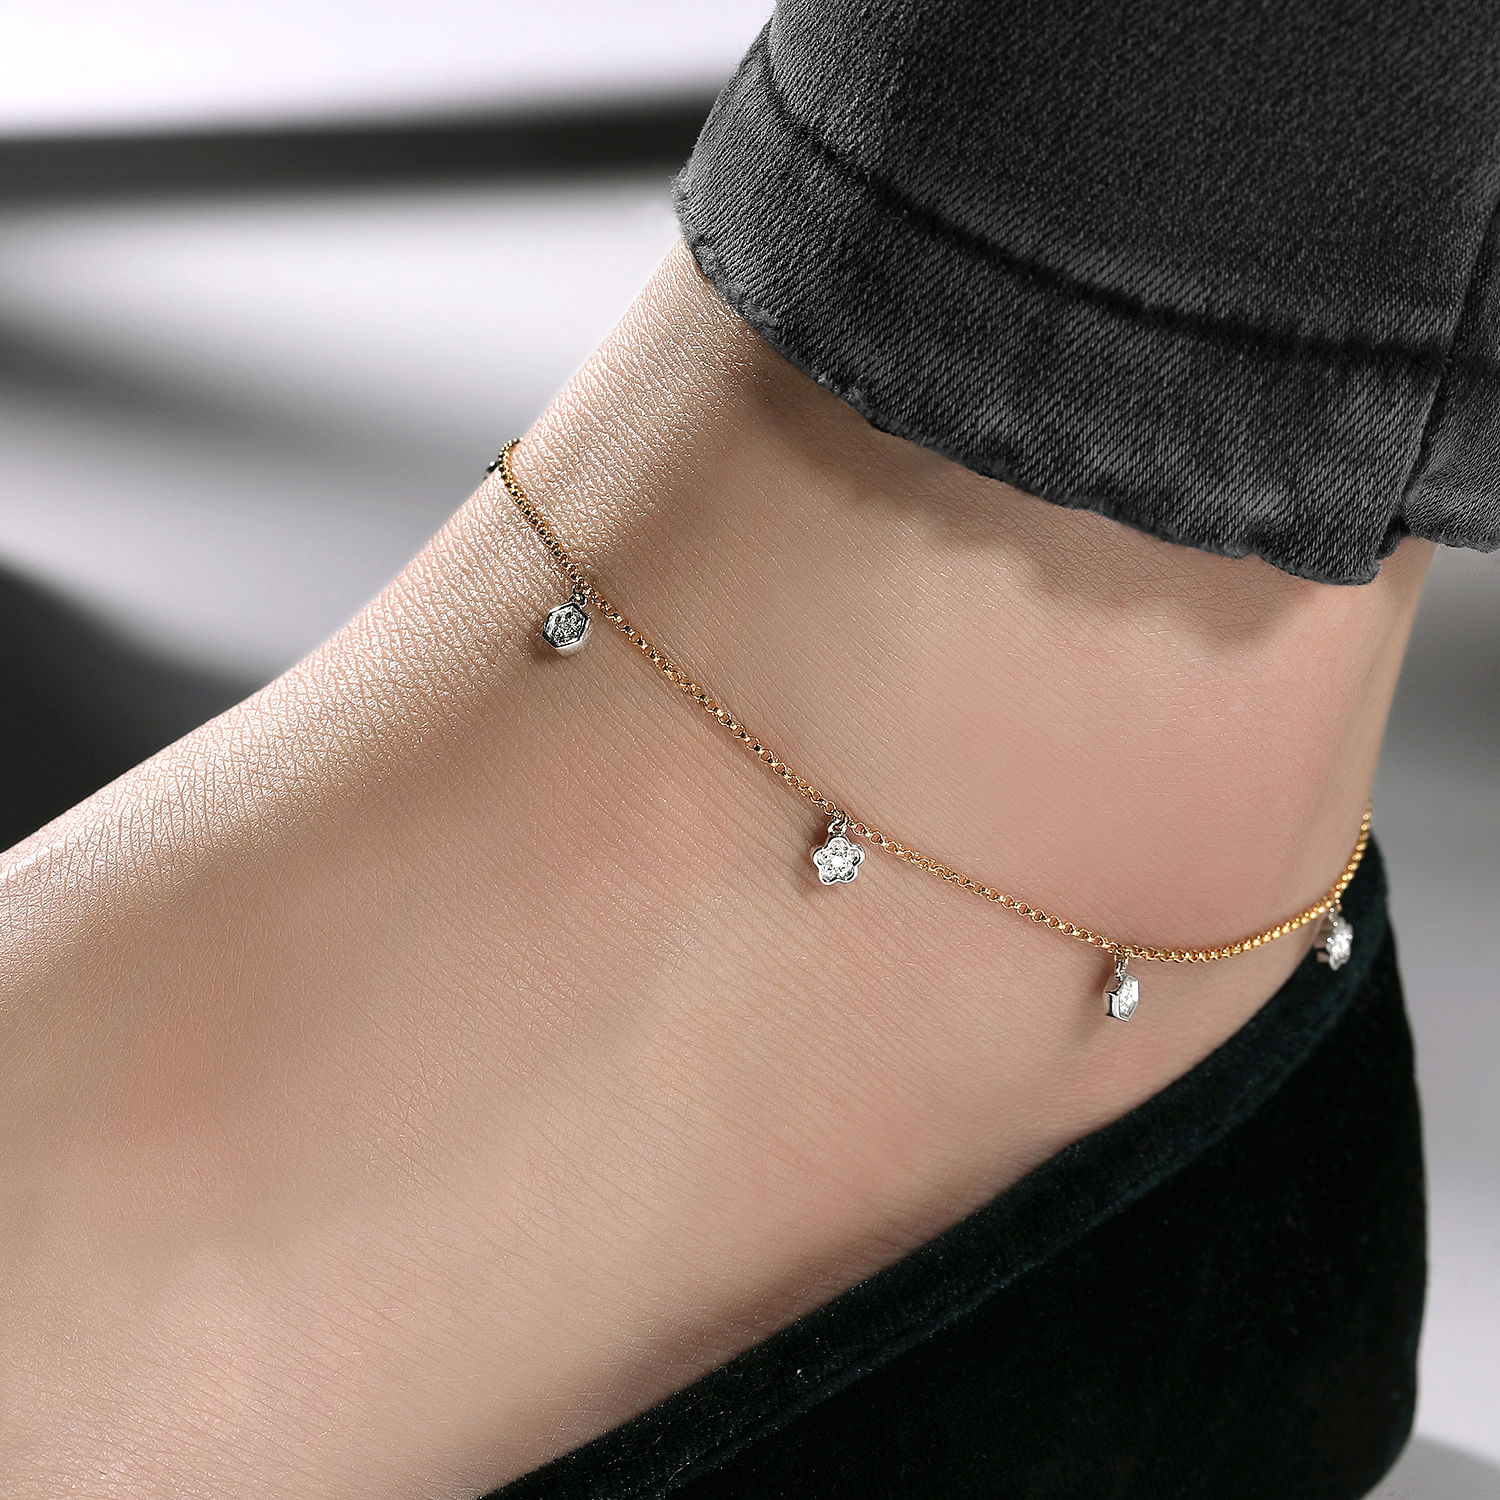 14K Yellow Gold Chain Ankle Bracelet with White Gold Diamond Hexagon and Flower Charms